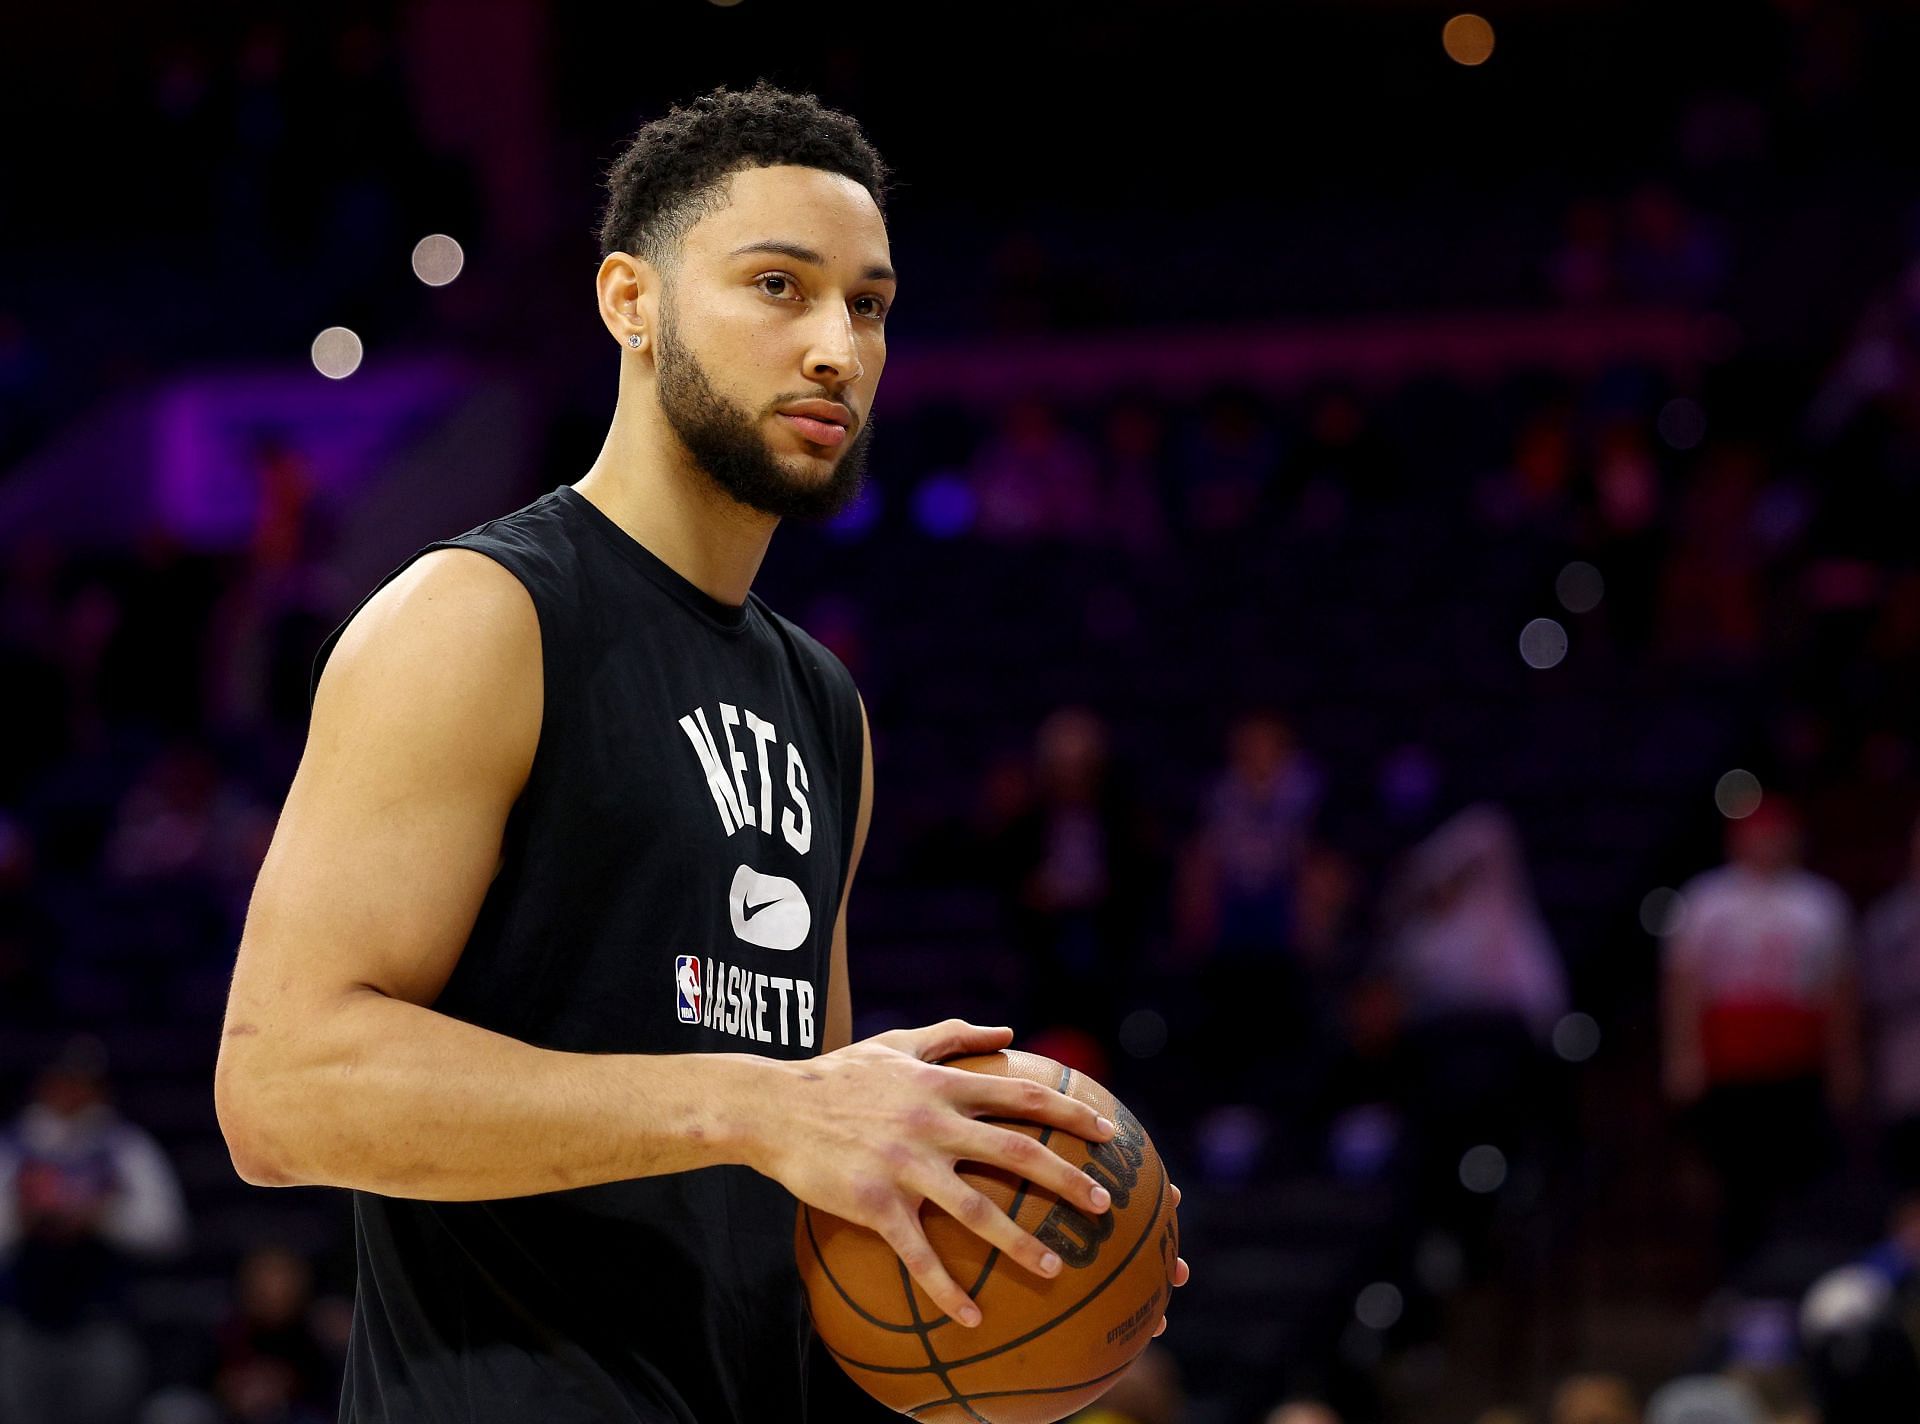 Ben Simmons tells Stephen A. Smith he's ready to play for Nets